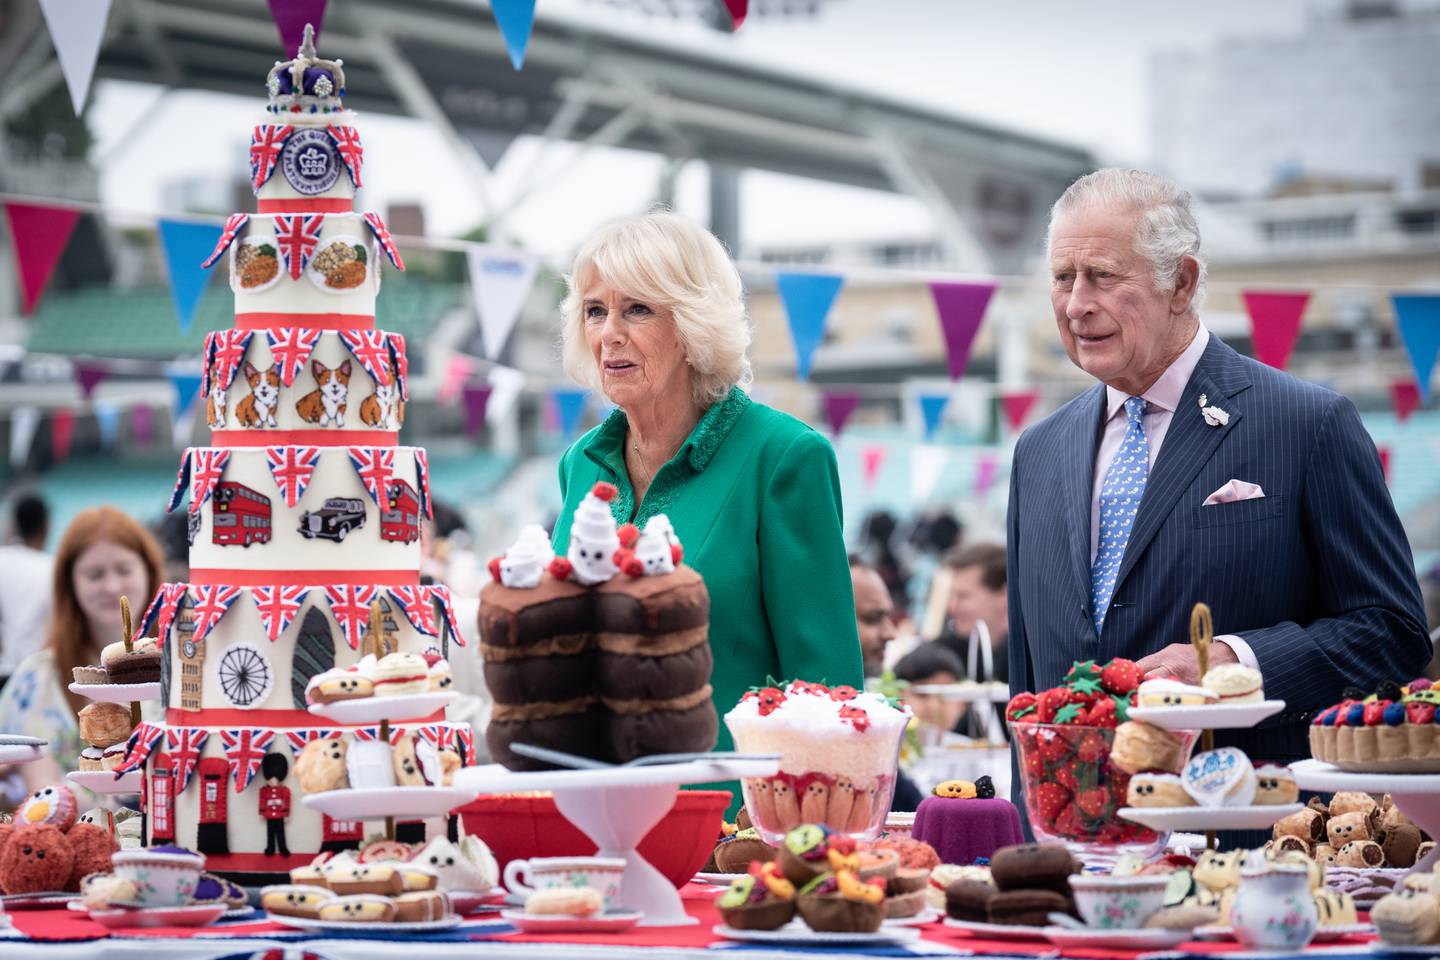 King Charles and his wife Camilla attend the Big Jubilee Lunch to celebrate Queen Elizabeth II's platinum jubilee. Photo: Stefan Rousseau